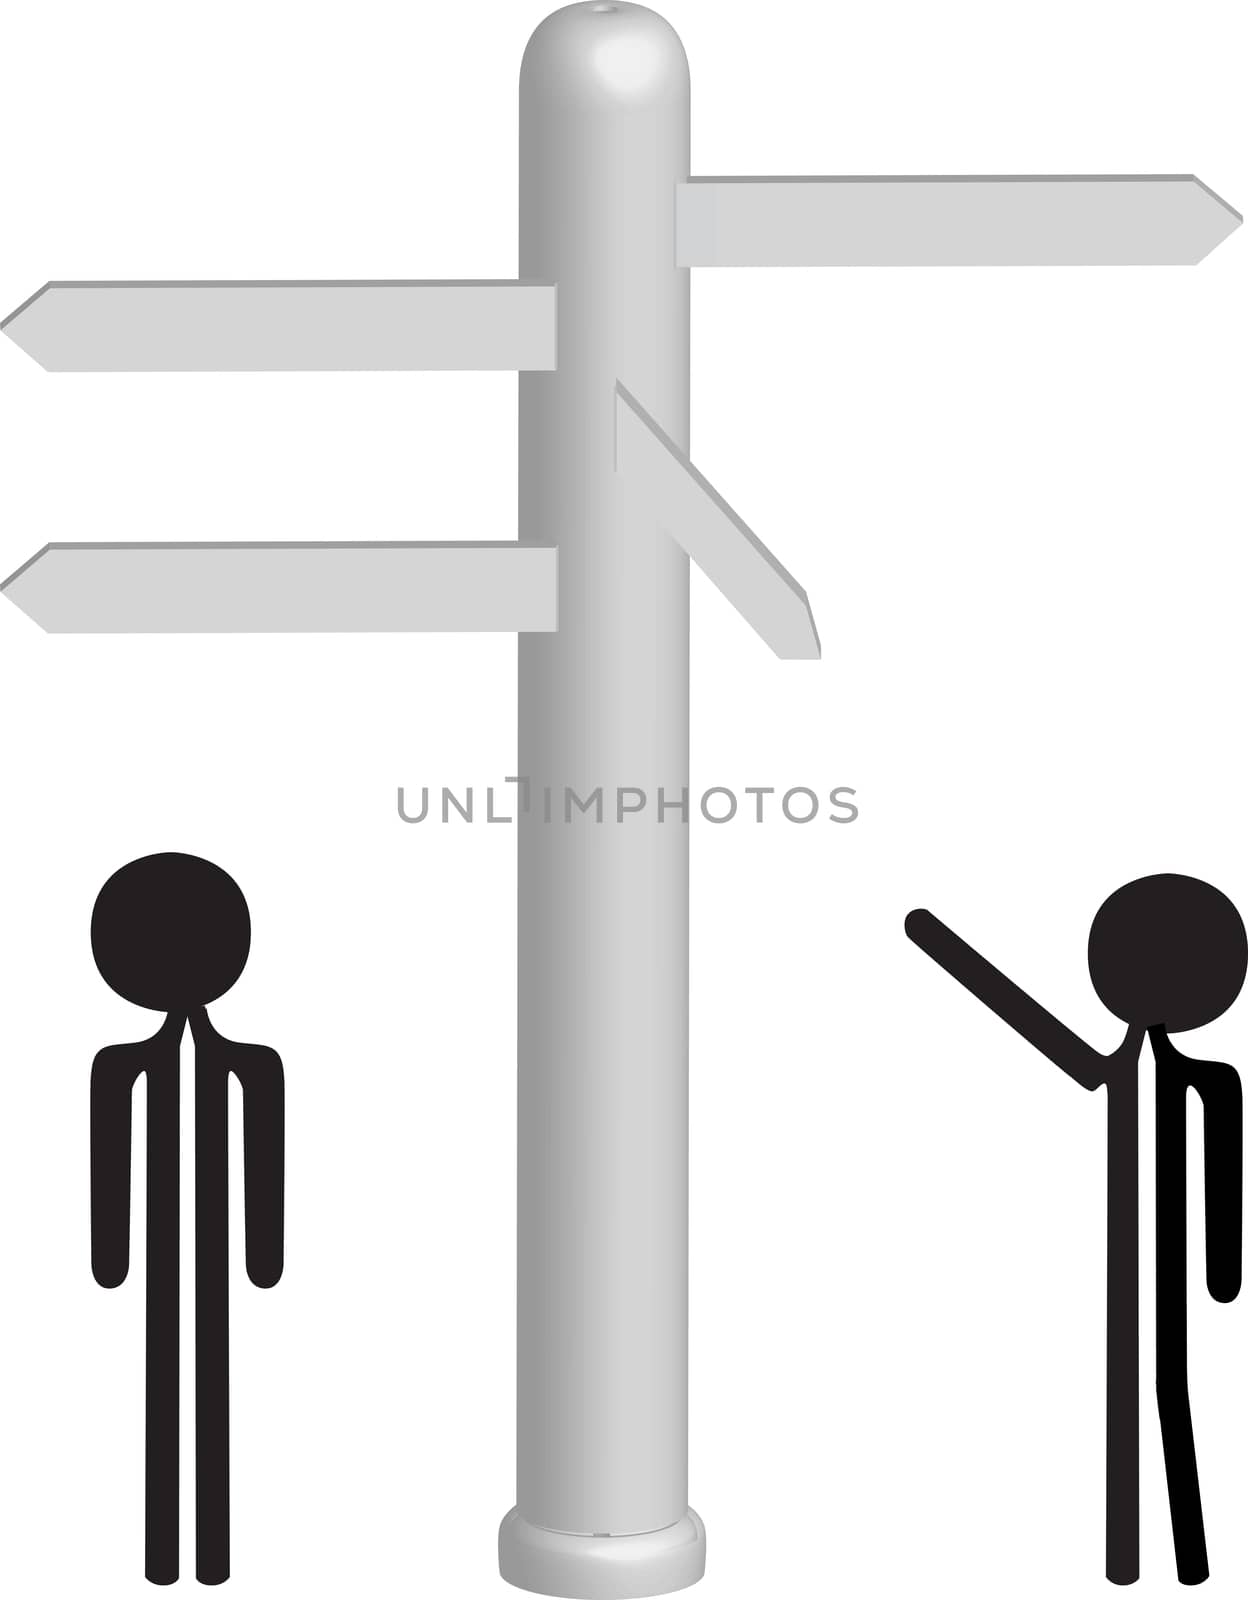 choice between directions by compuinfoto